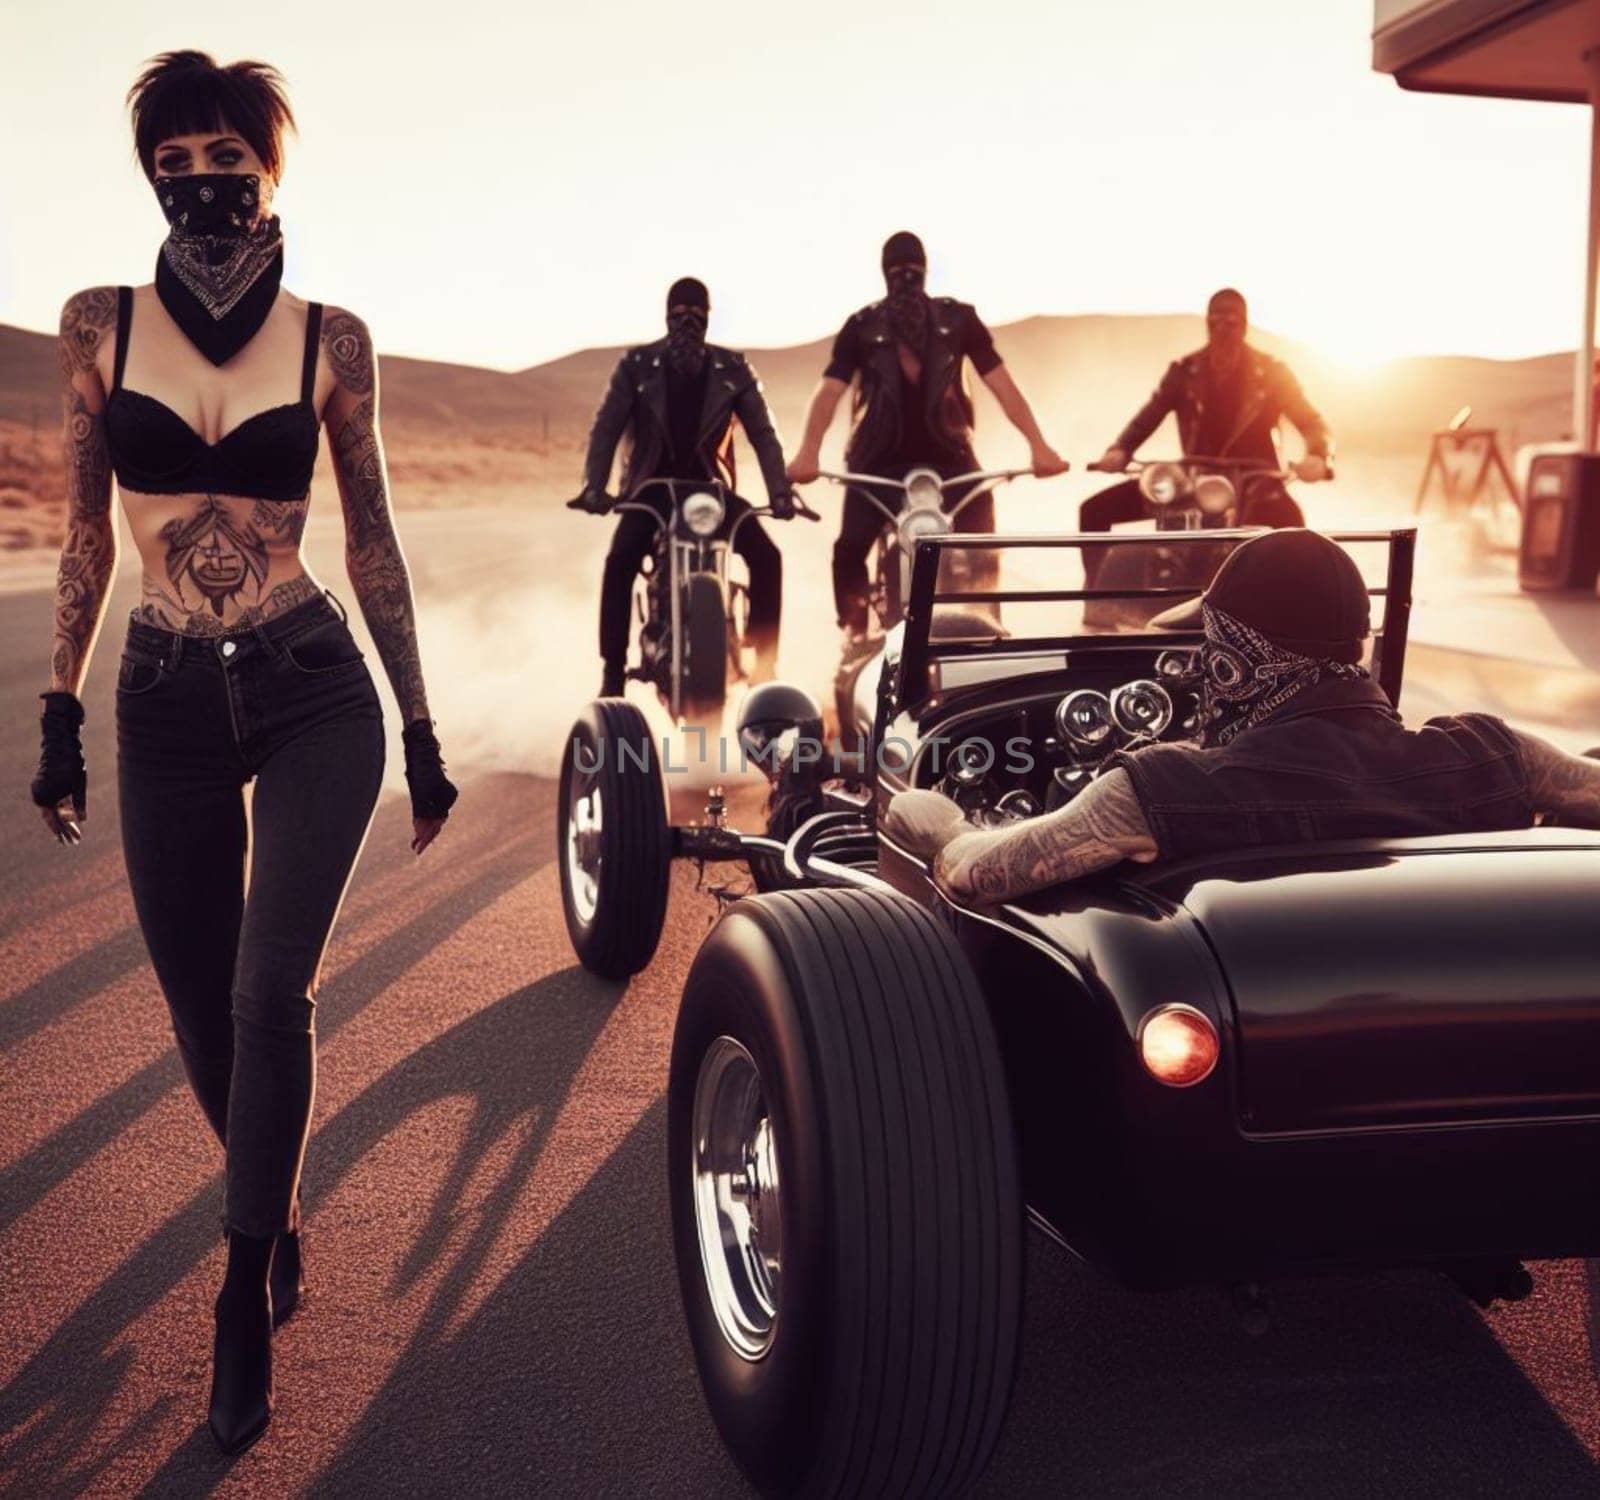 pinup girl, hipster vandals gang wear jeans, leather, drive steampunk hotrods, bikes, on the road by verbano